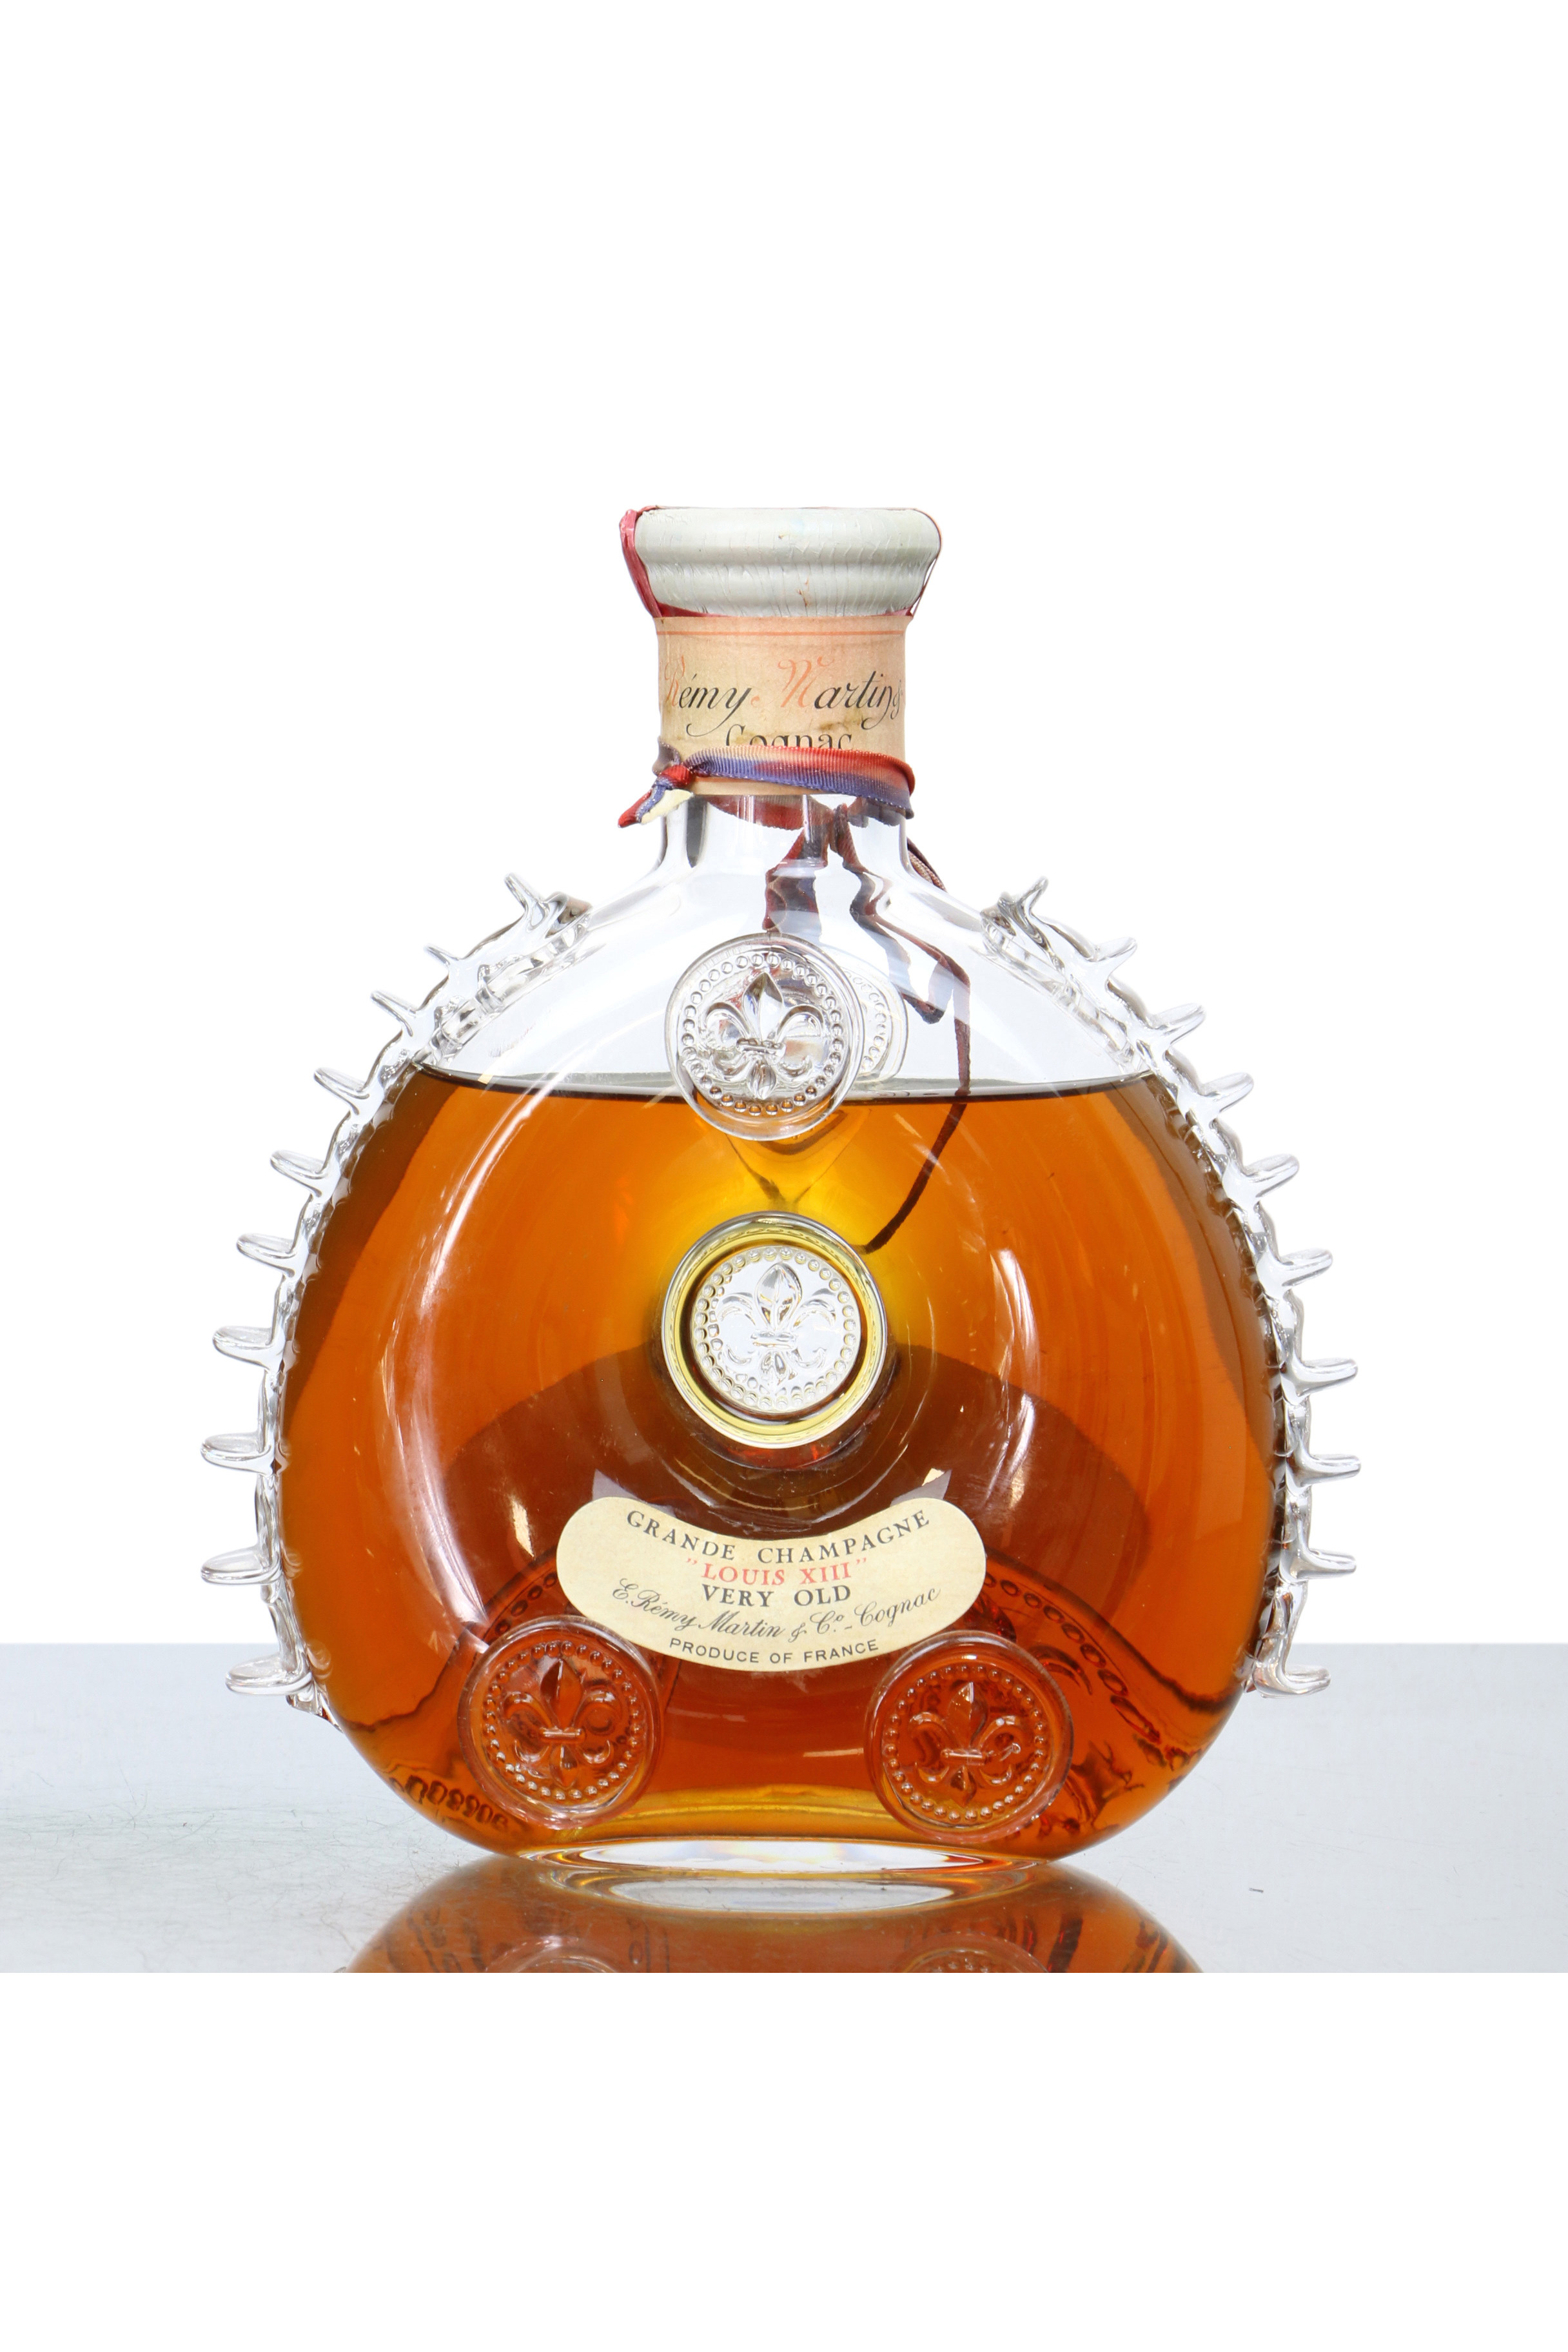 The Louis XIII Decanter